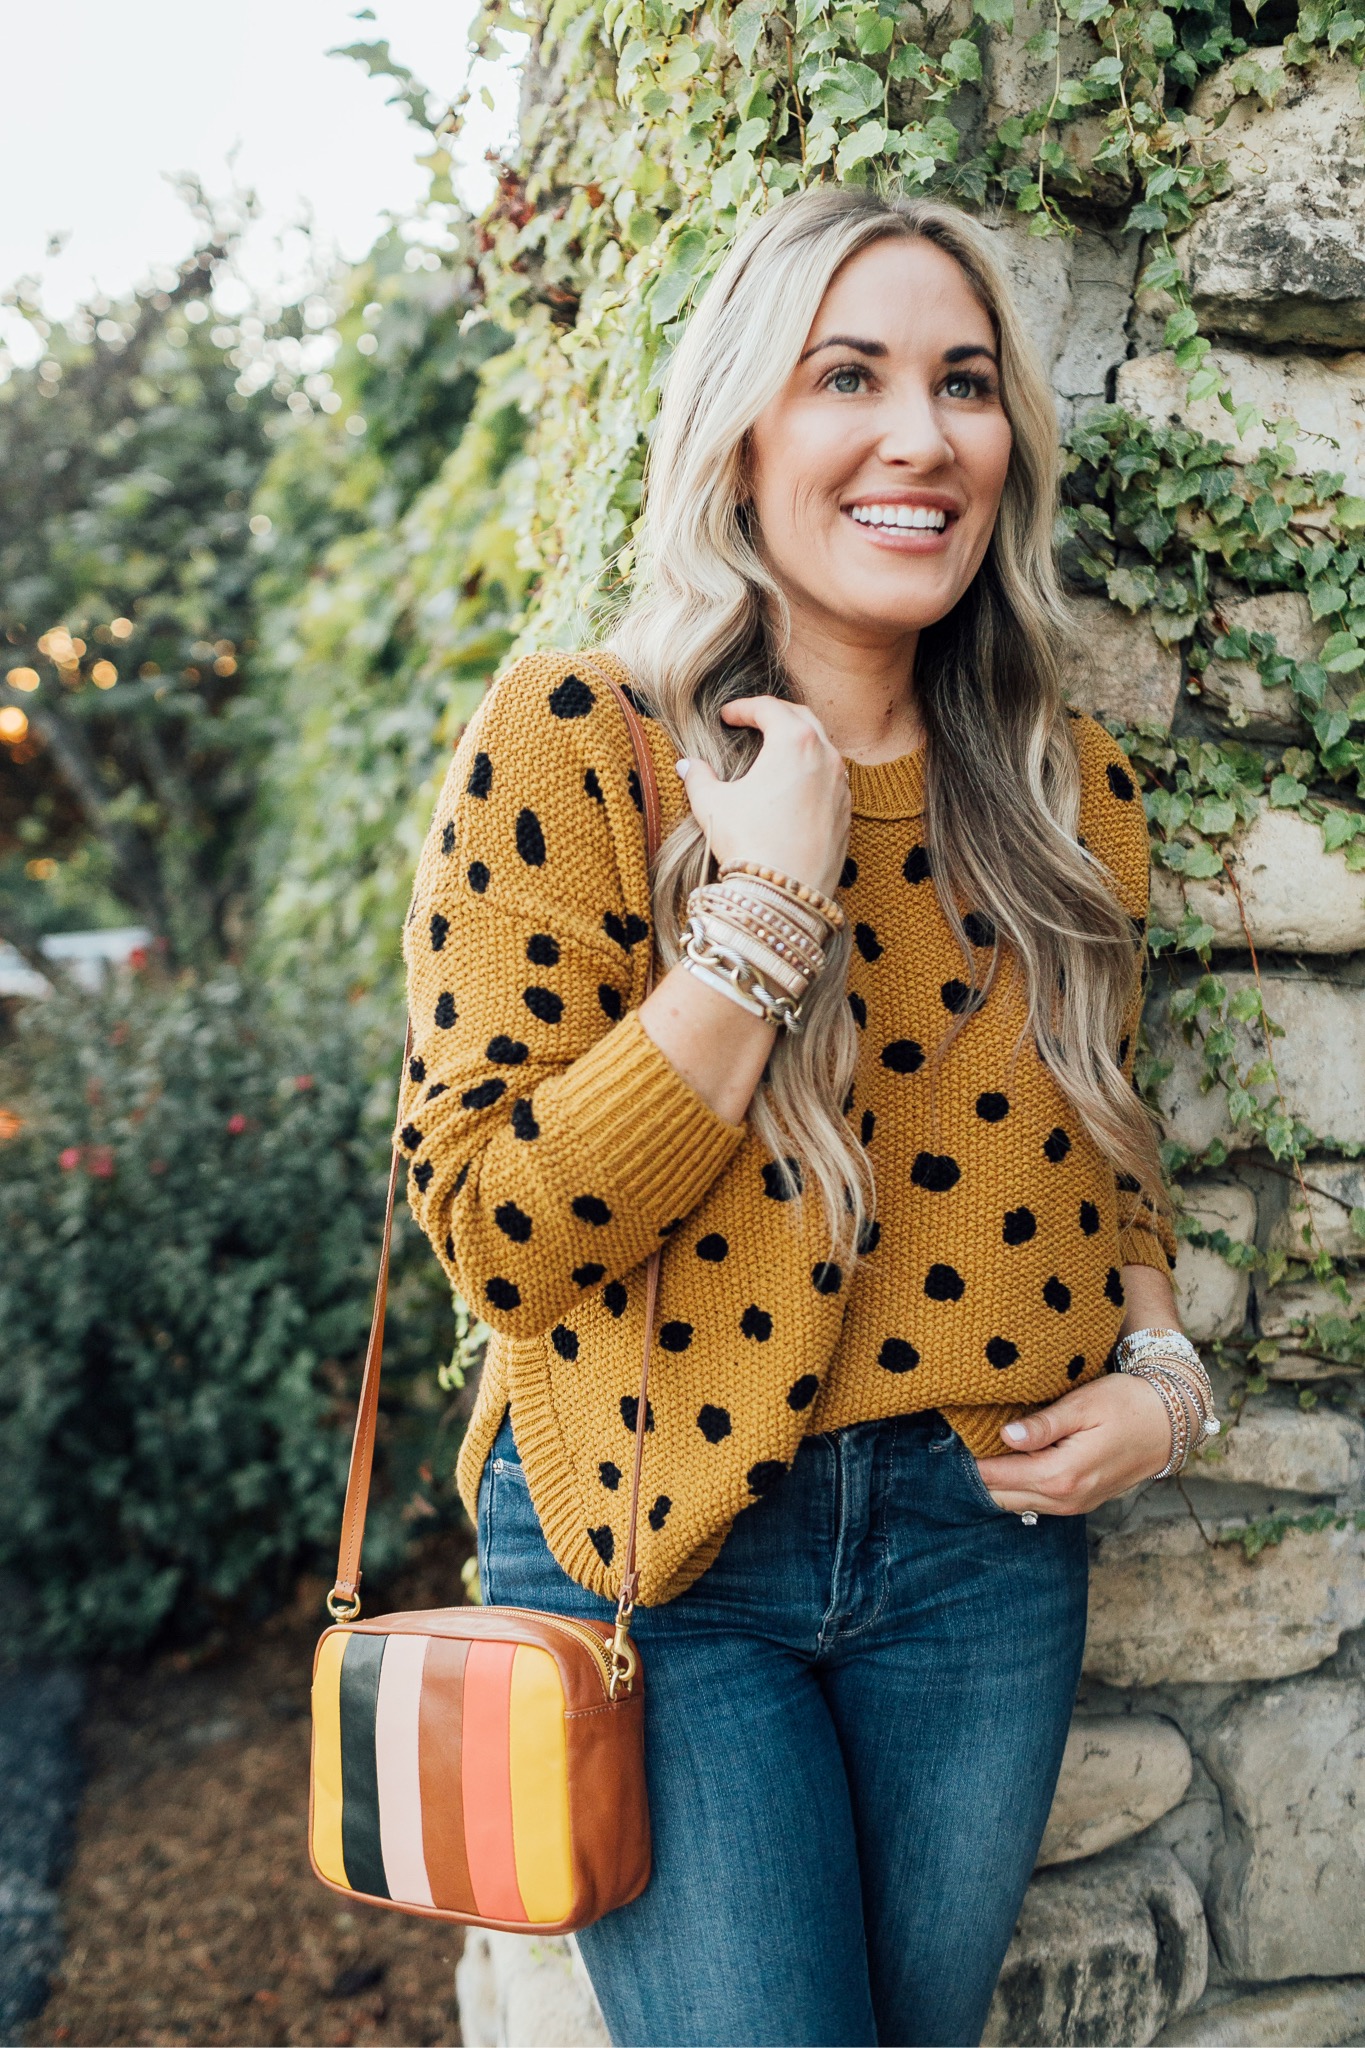 Fall trend colors featured by top US fashion blog, Walking in Memphis in High Heels: image of a woman wearing Good American skinny jeans, Vince Camuto booties, Clare V. Striped crossbody bags, and  Victoria Emerson stackable bracelets.